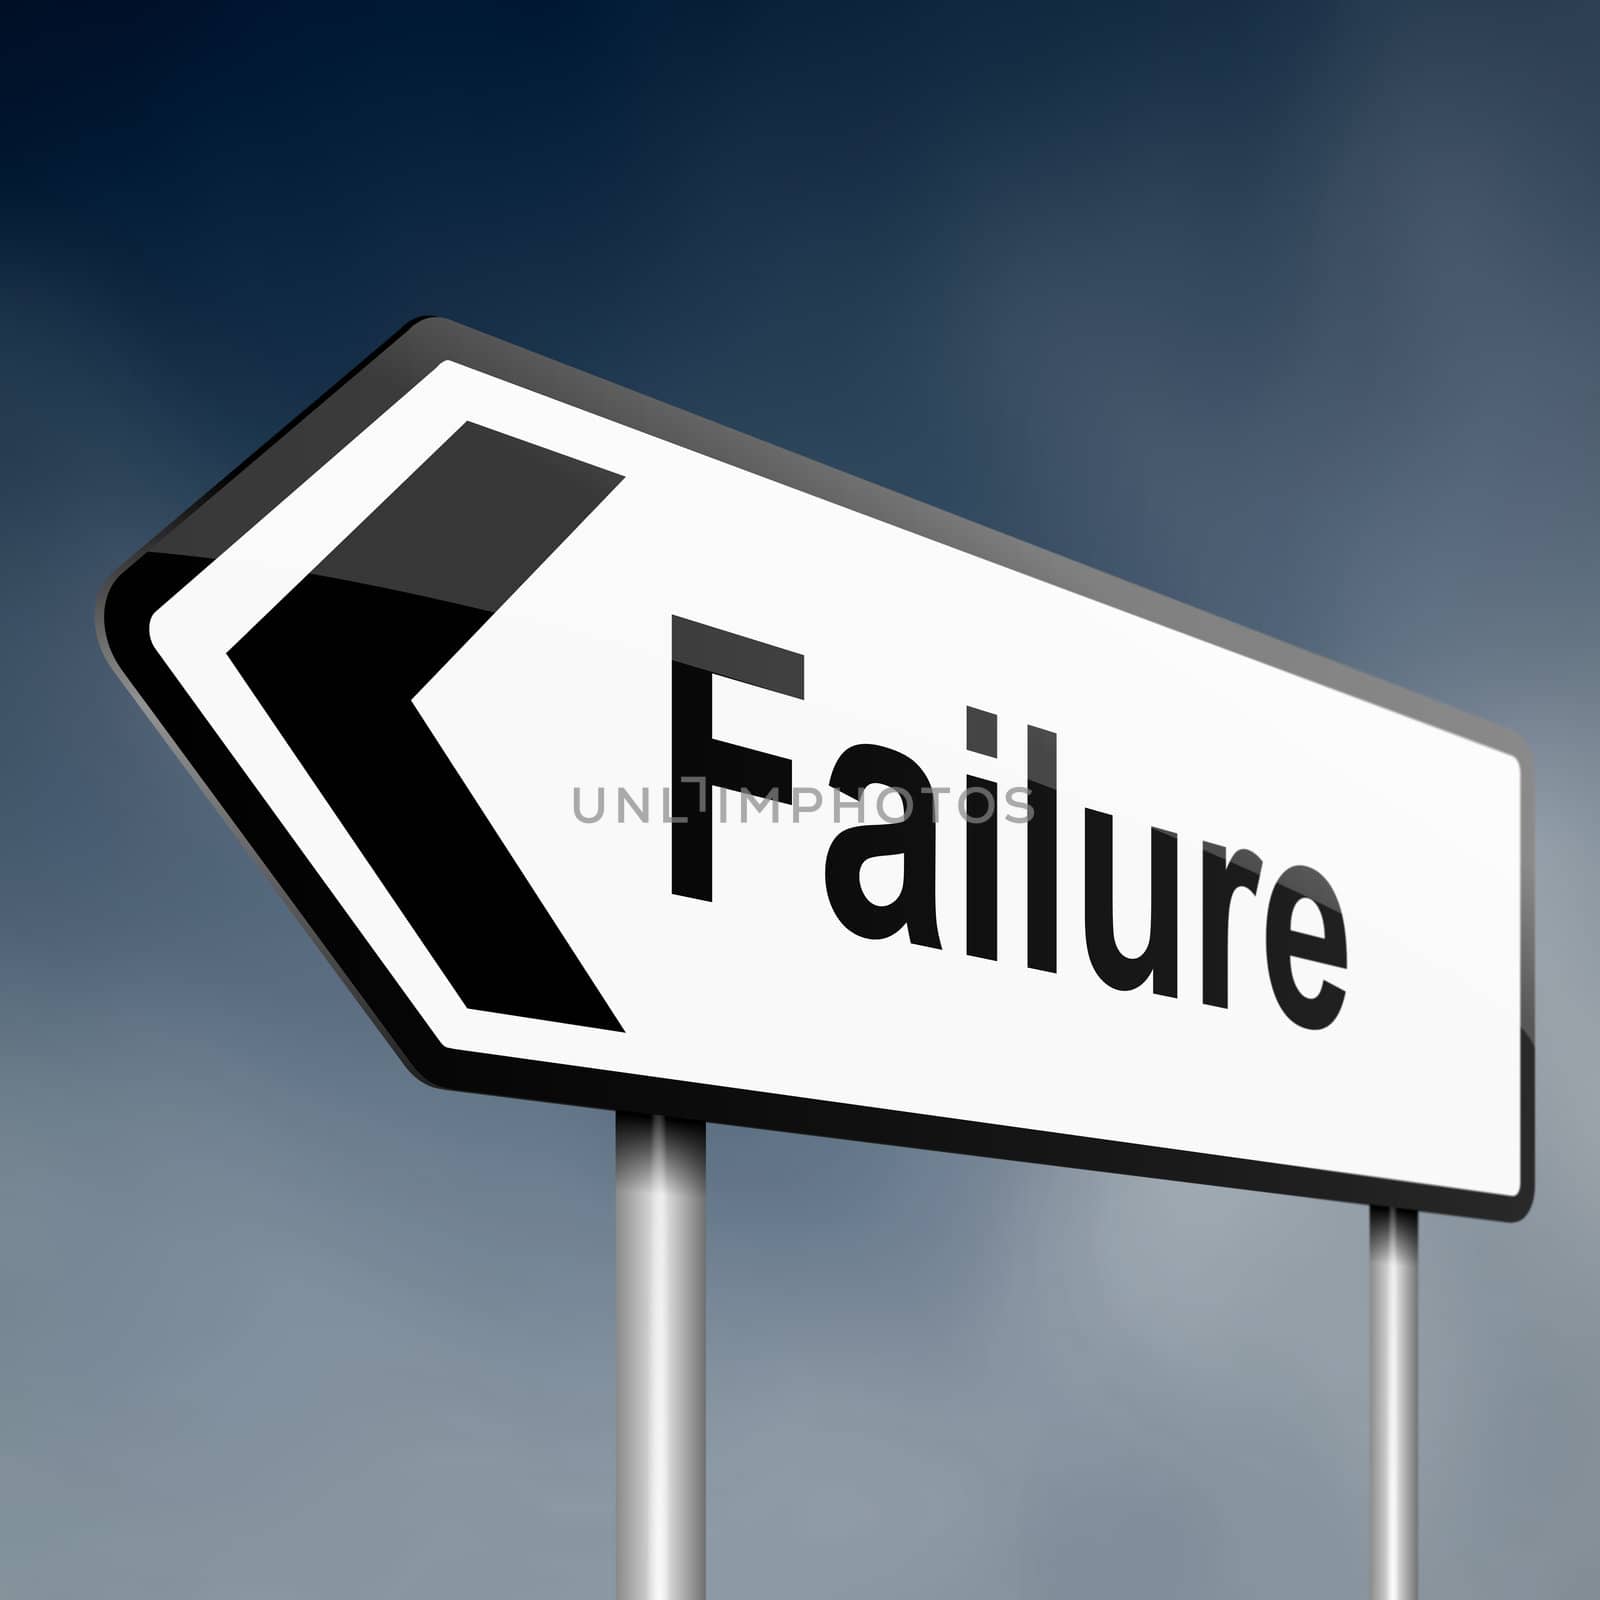 illustration depicting a sign post with directional arrow containing a failure concept. Blurred background.